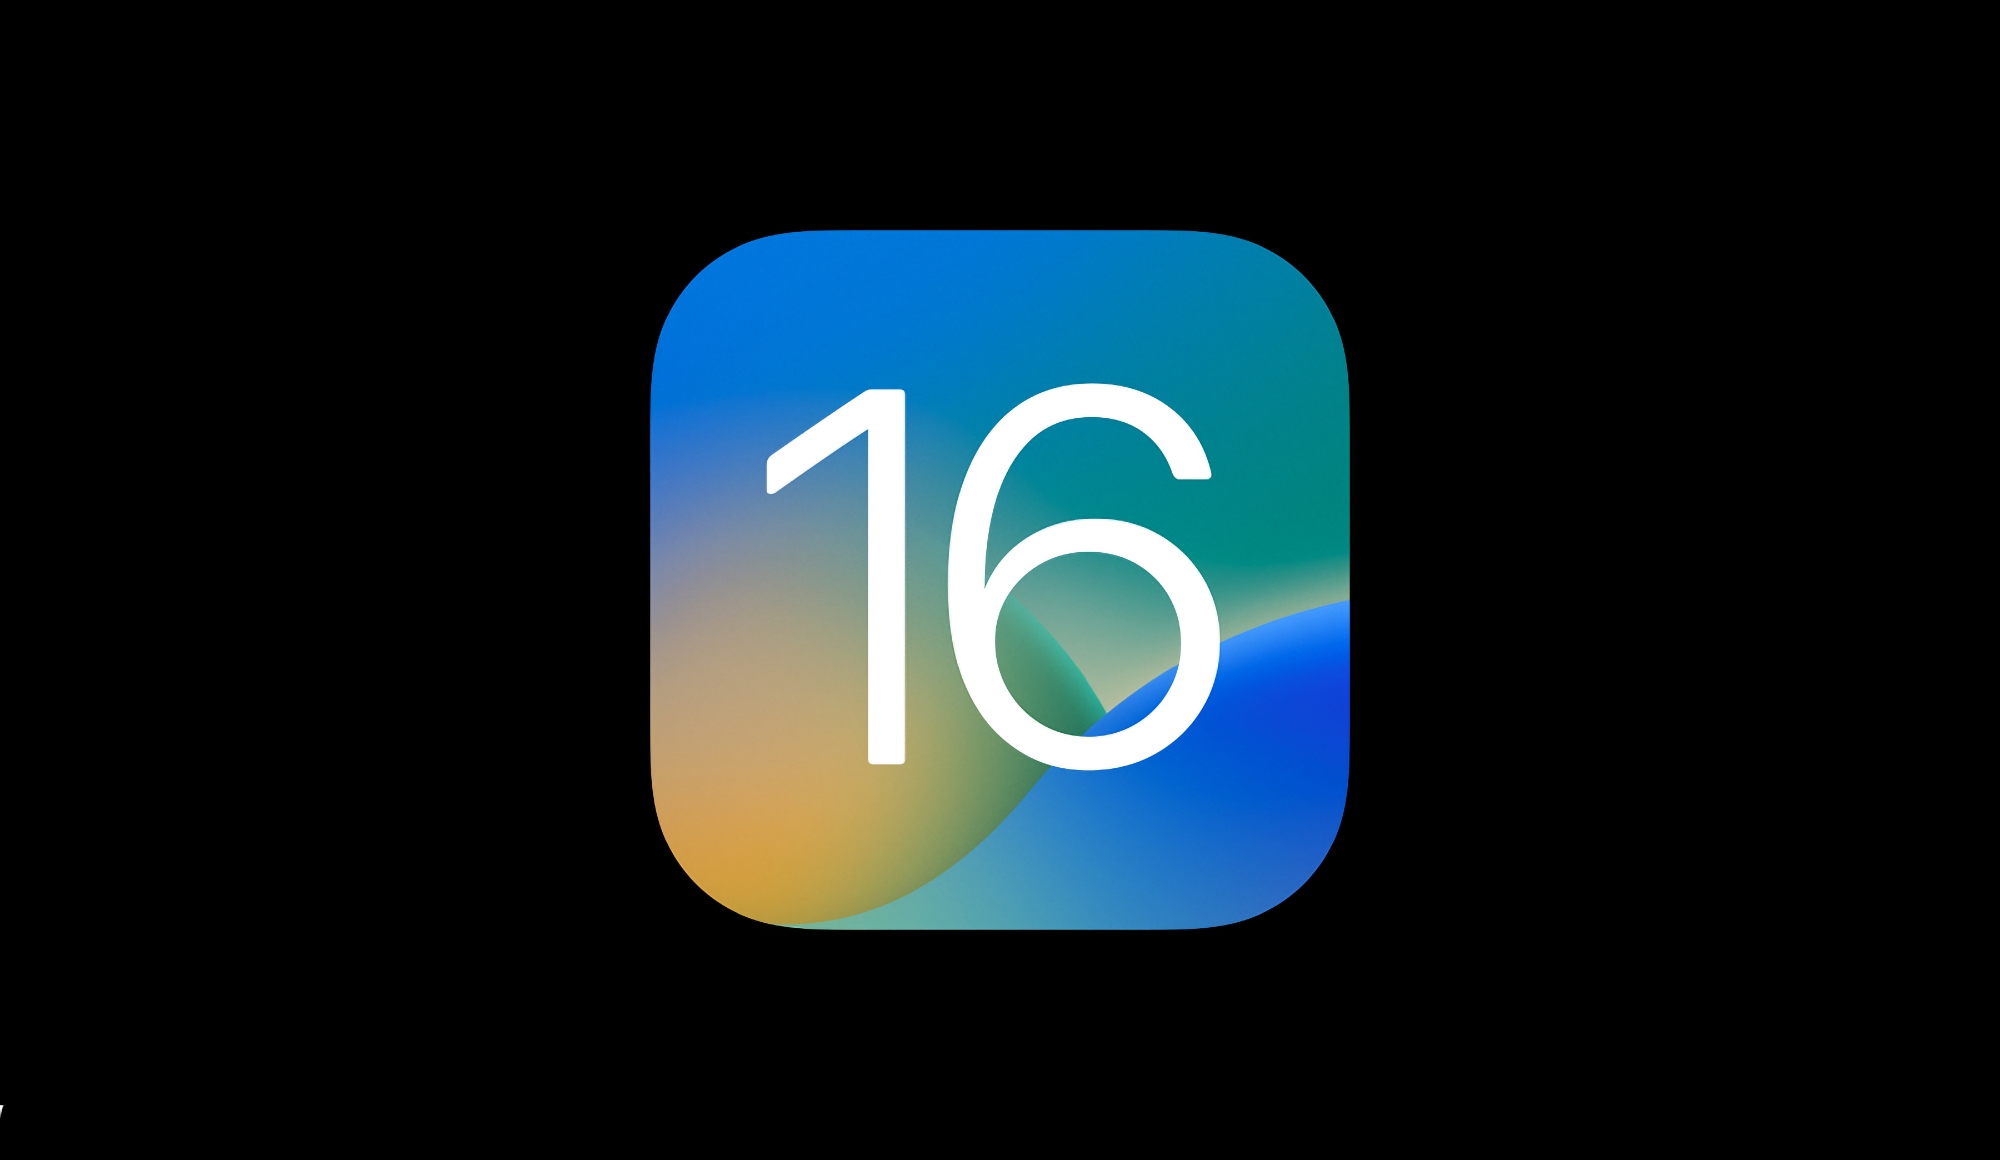 Apple released iOS 16.0.3: Tell us what's new and when to expect the firmware